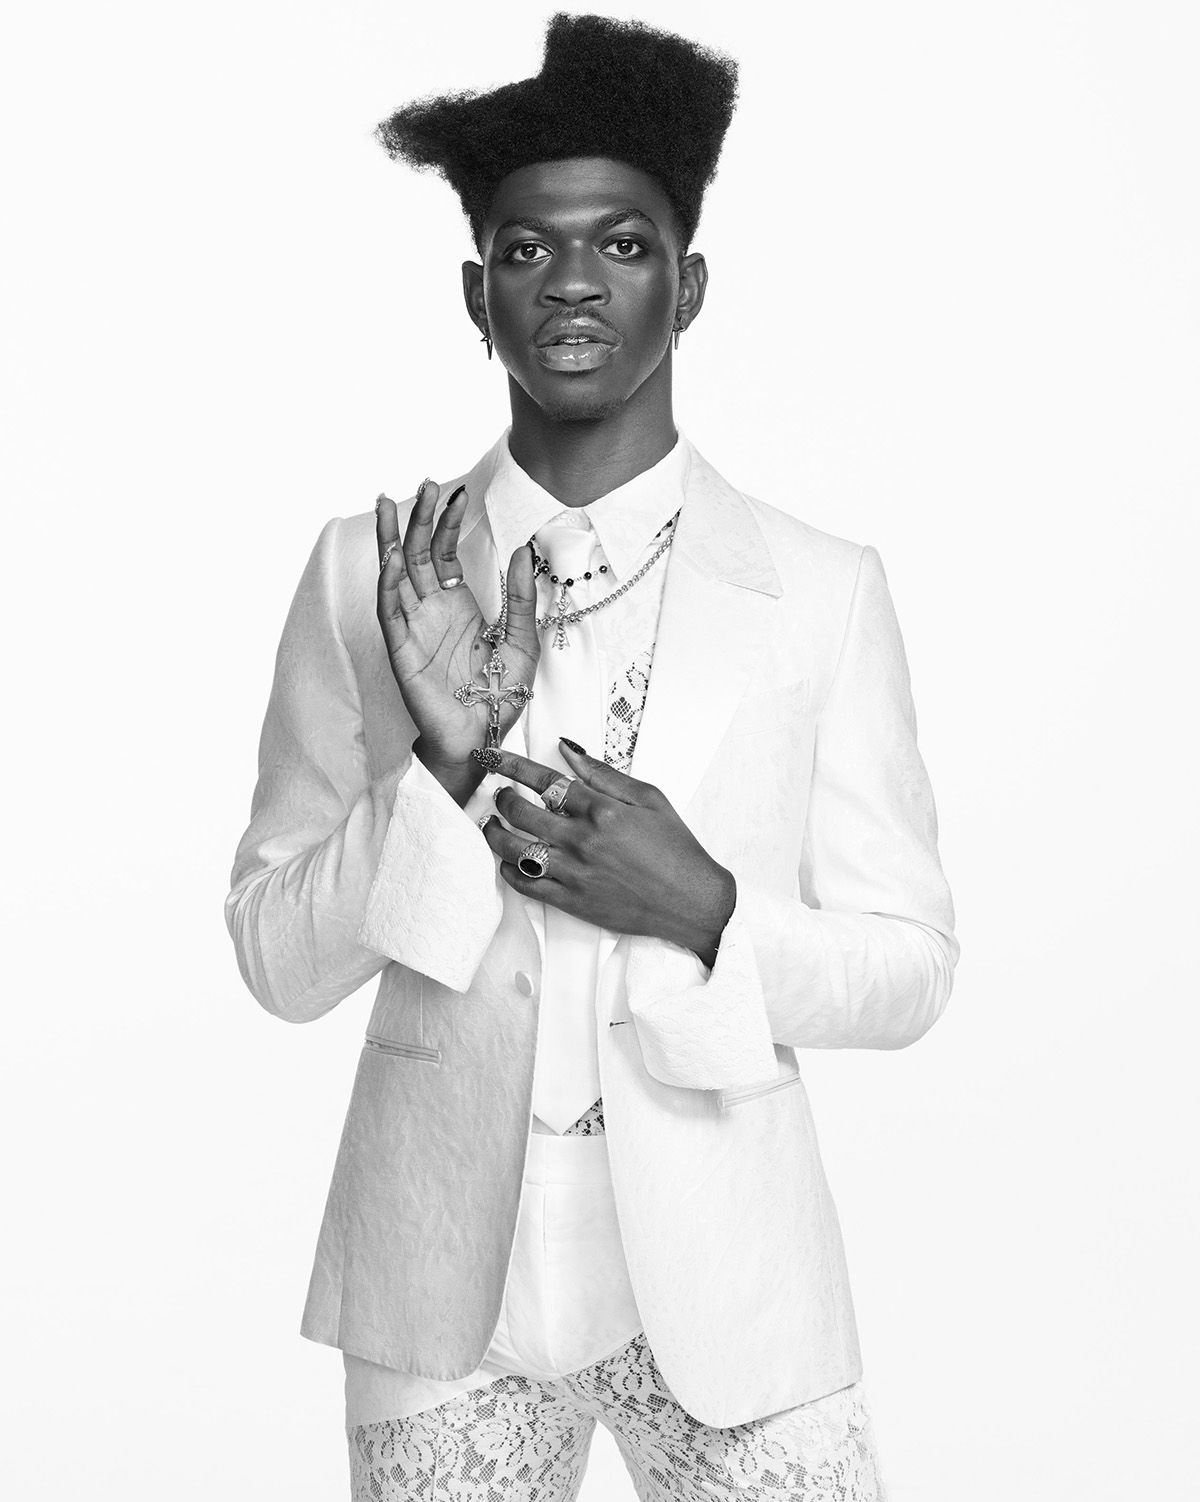 Lil Nas X covers L’Uomo Vogue Issue 12 by Ethan James Green